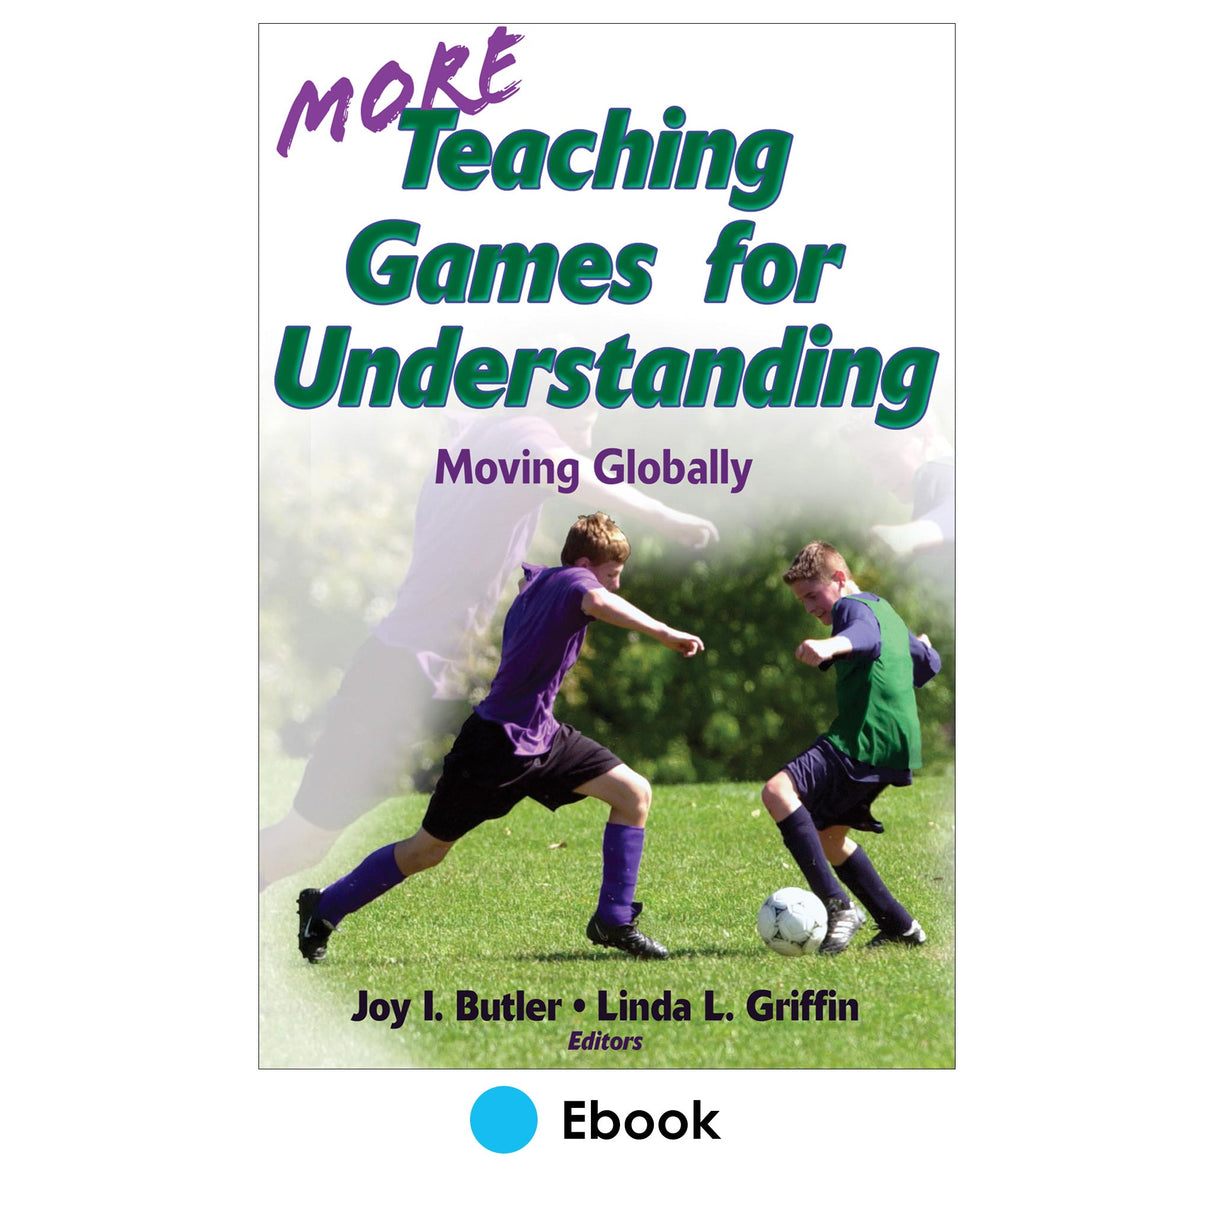 More Teaching Games for Understanding PDF